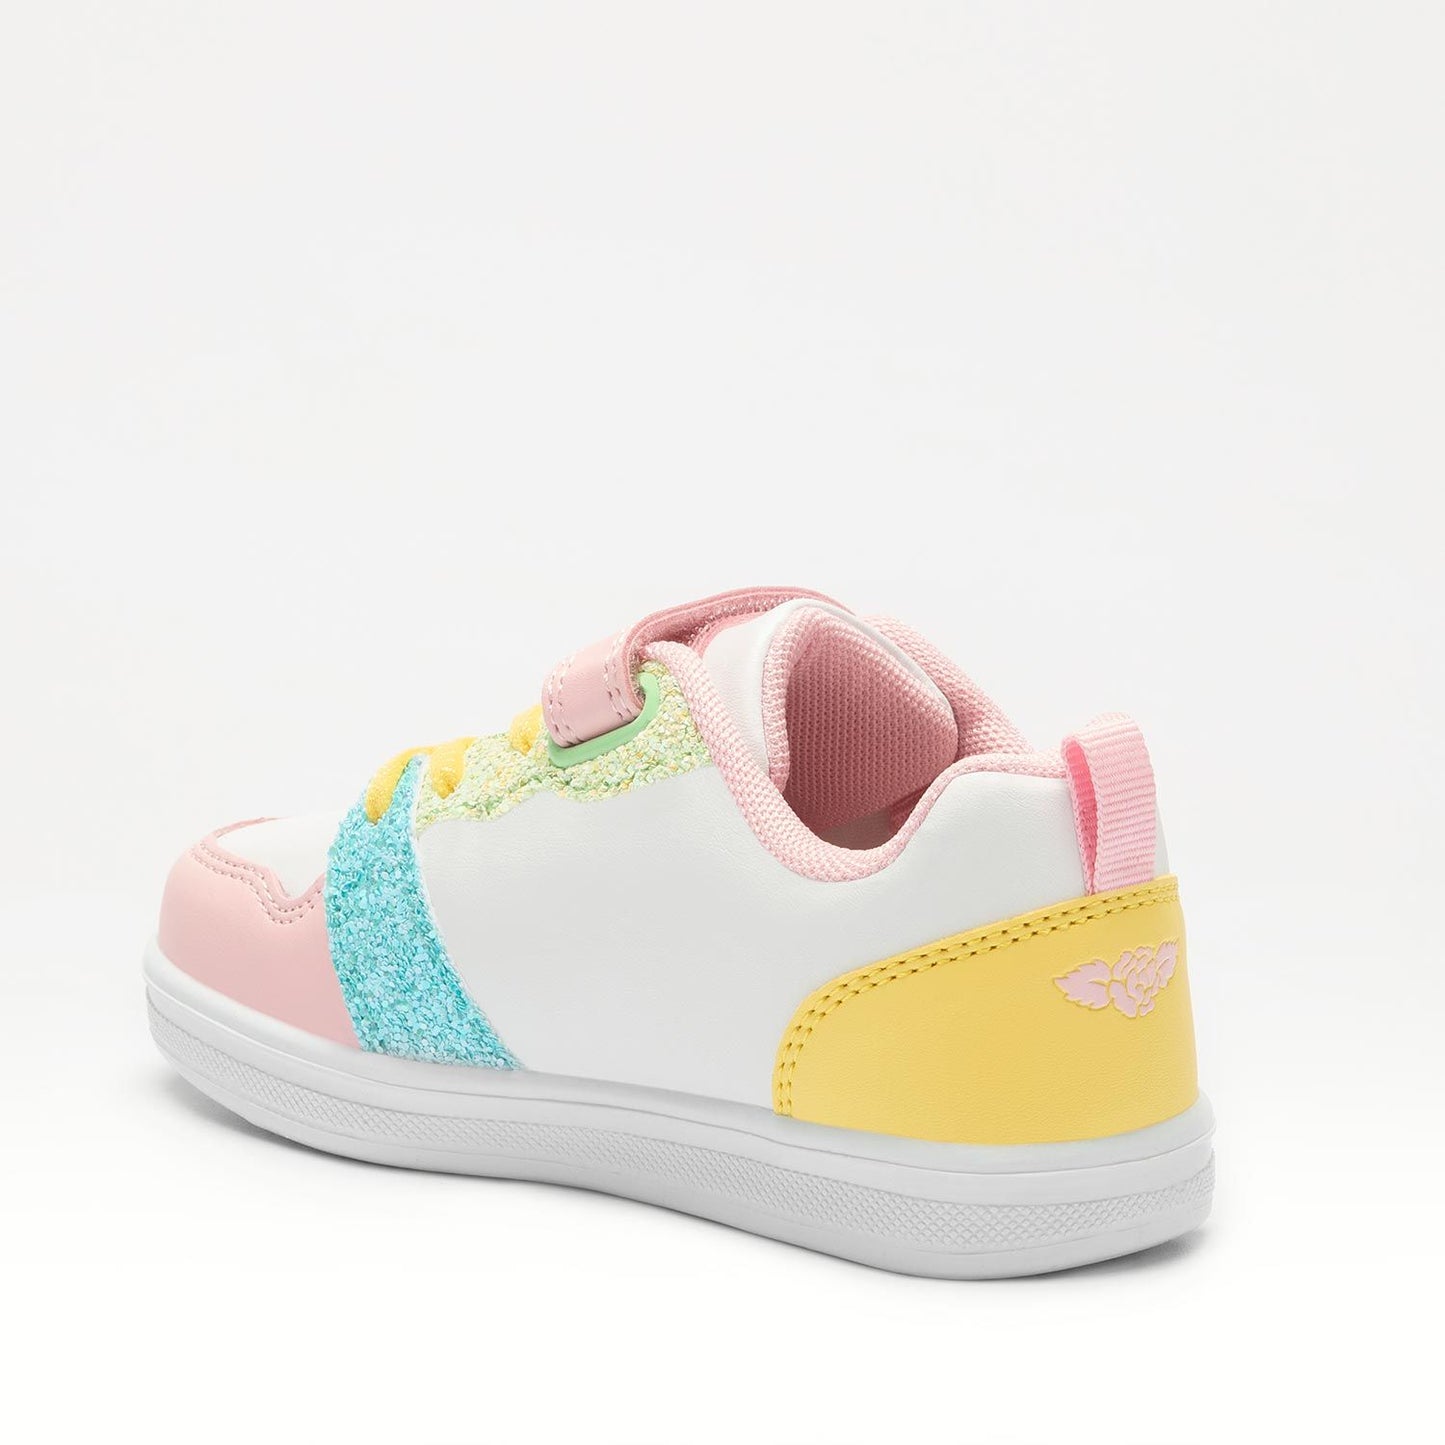 A girls casual shoe by Lelli Kelly, style LK360 Daisy in white glitter multi leather with lace and velcro fastening. Angled view.